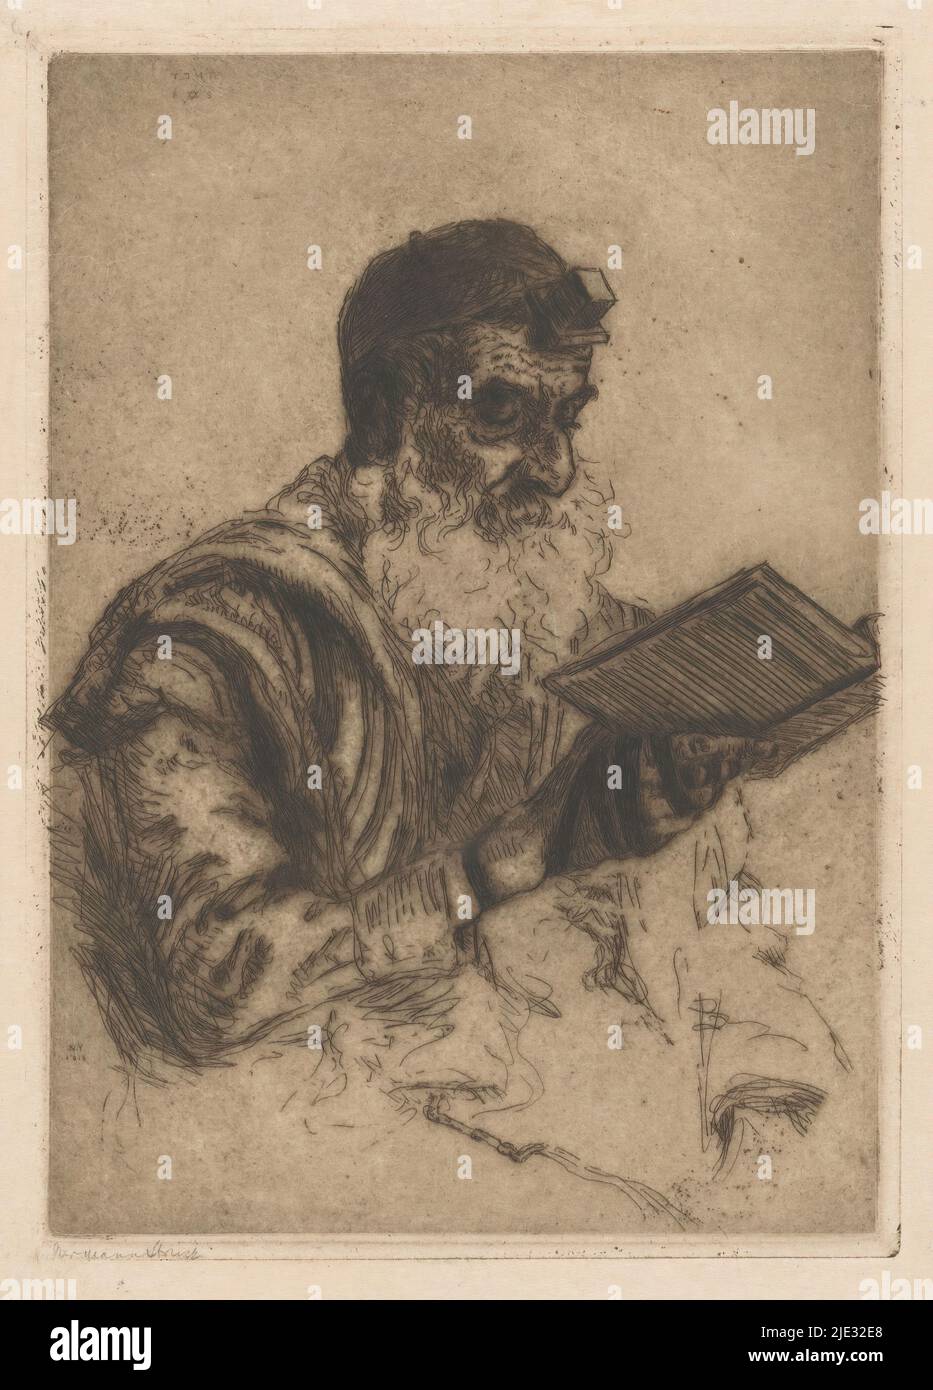 Praying Jewish man, Portrait of a praying Jewish man holding a prayer book in his right hand. He wears prayer belts, the tefilin, and a prayer rug, the tallit., print maker: Hermann Struck, (signed by artist), New York (city), 1913, paper, etching, drypoint, height 209 mm × width 148 mm Stock Photo